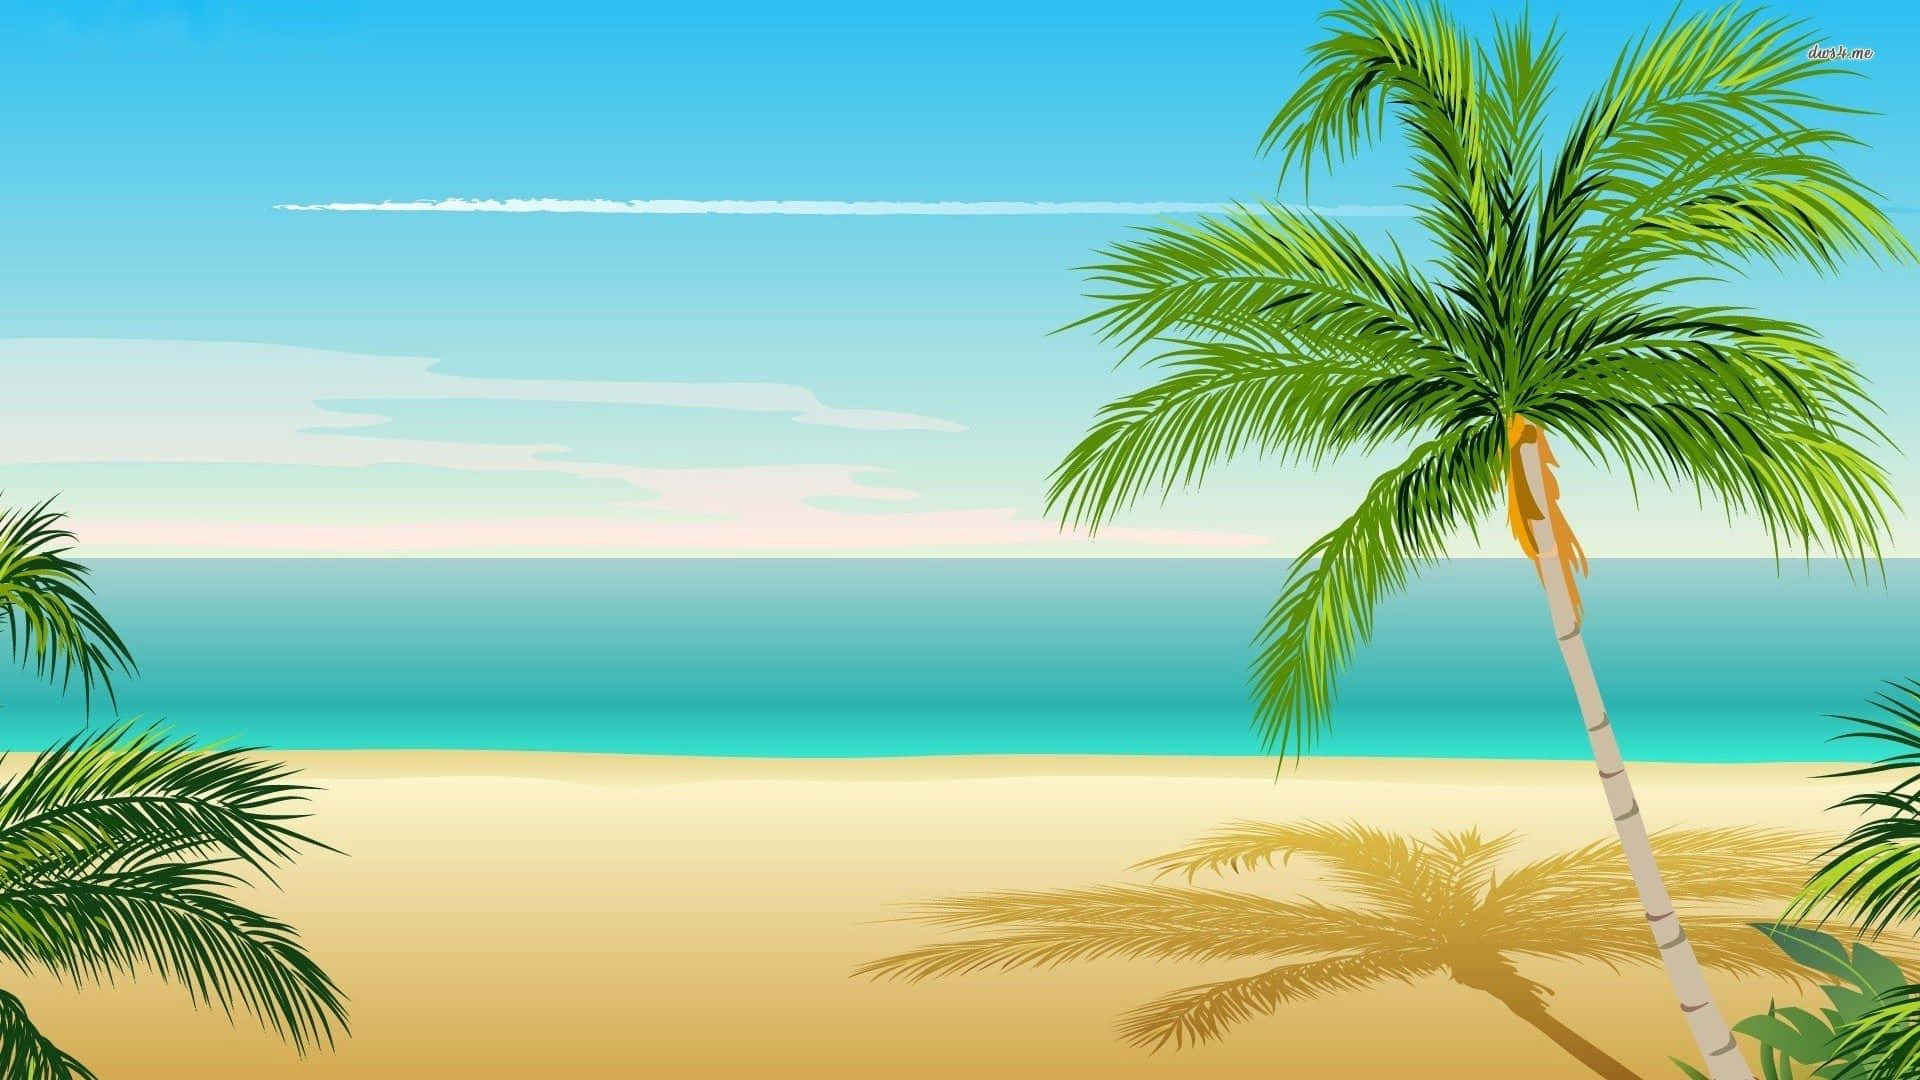 Peaceful Desktop Background with Palm Tree Wallpaper